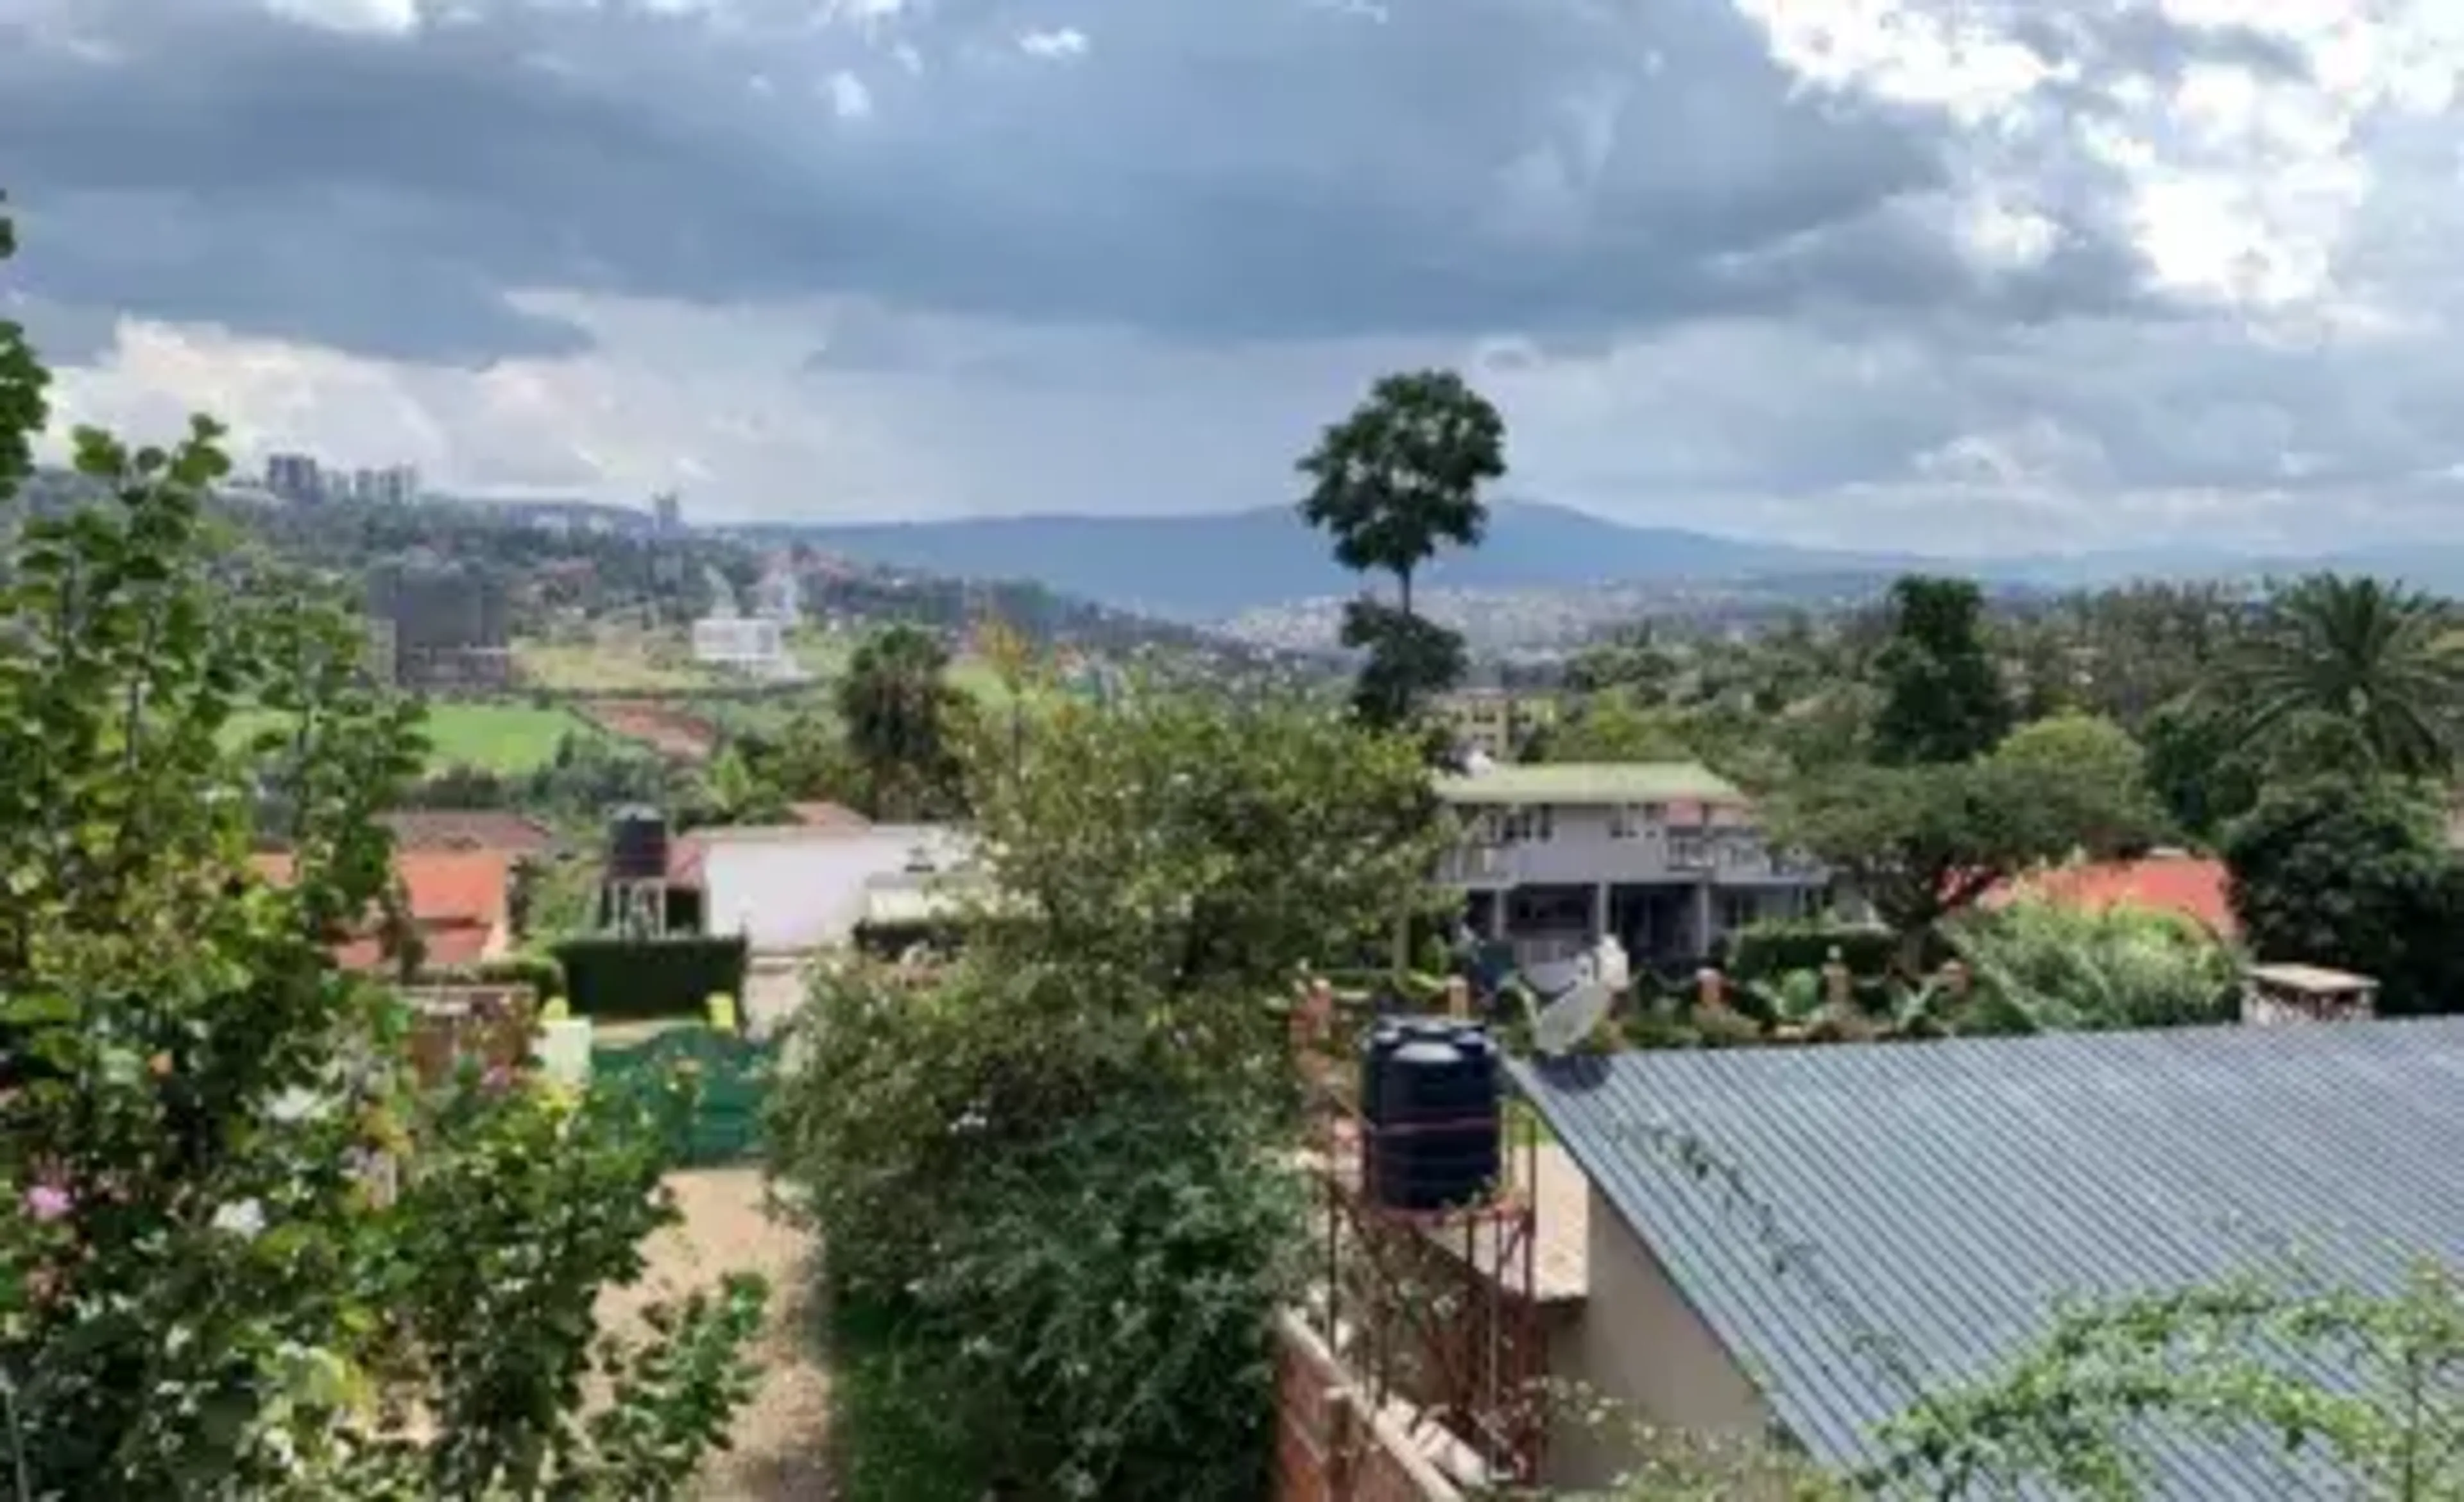 View from Kigali